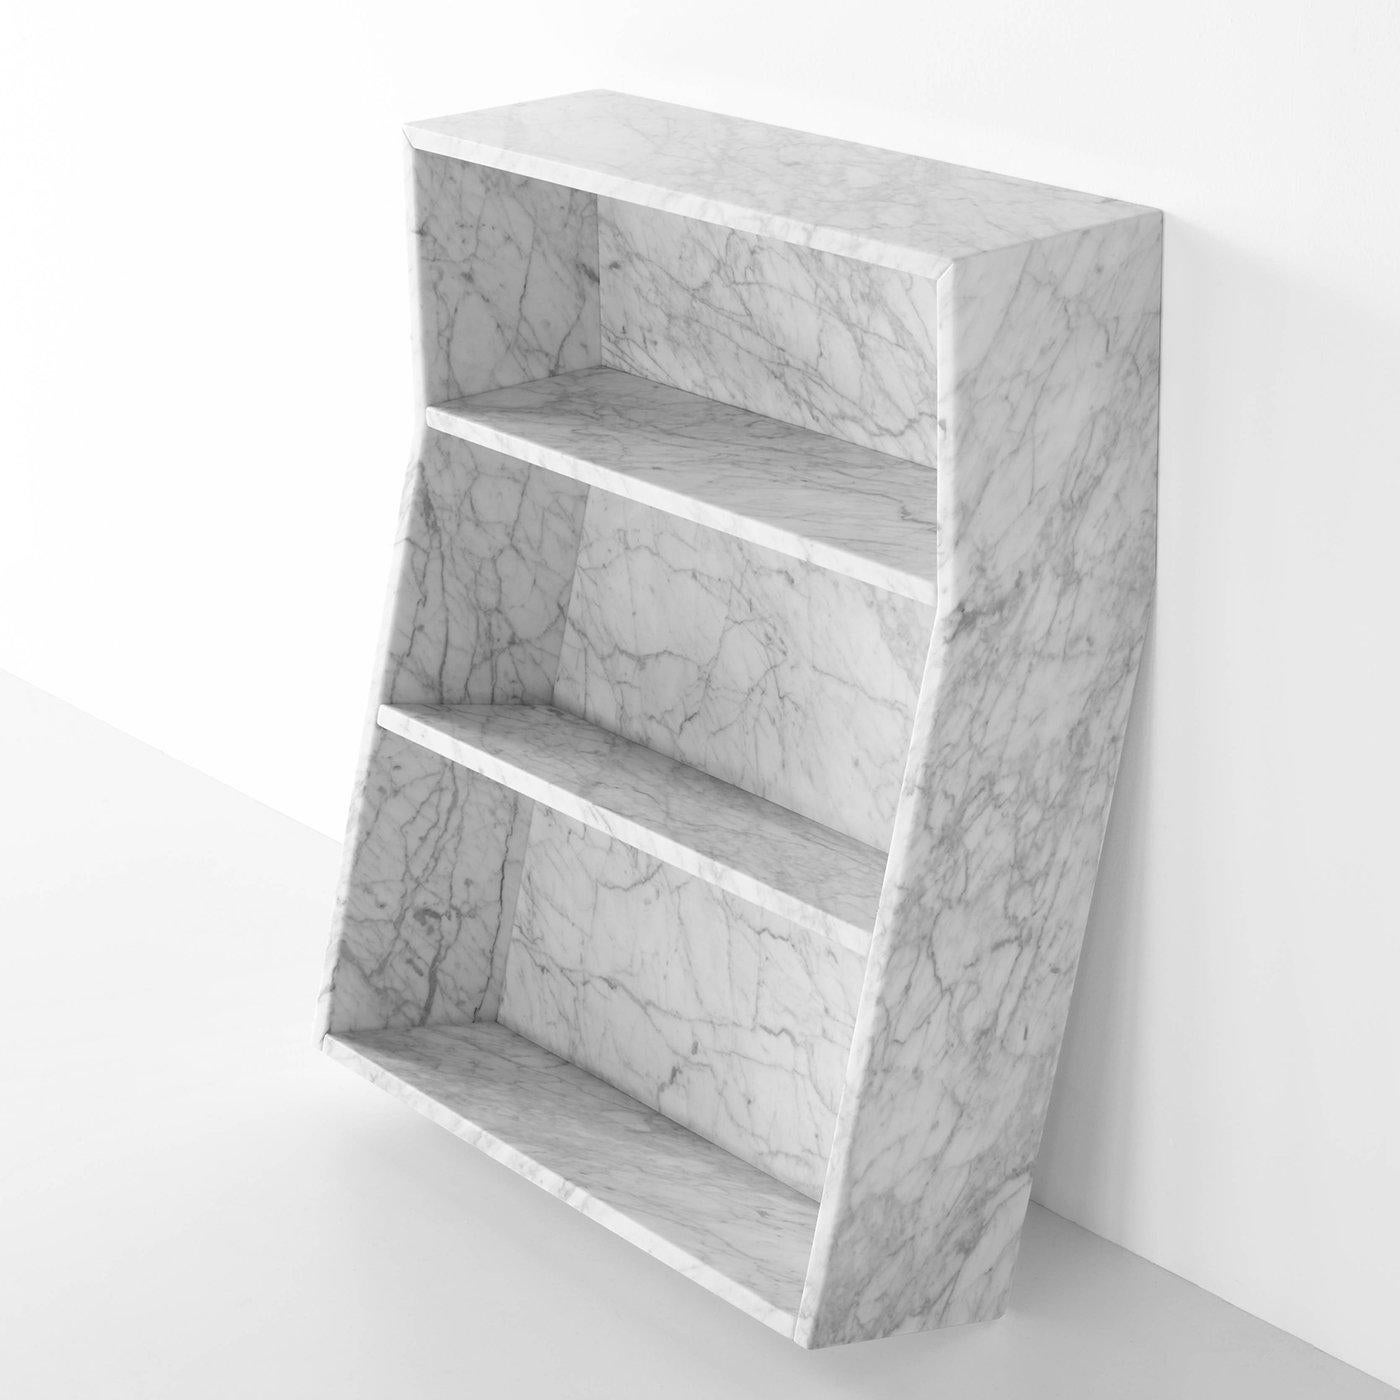 Bookcase in white Carrara marble, matte polished finish also available in black Marquina marble, matte polished finish.